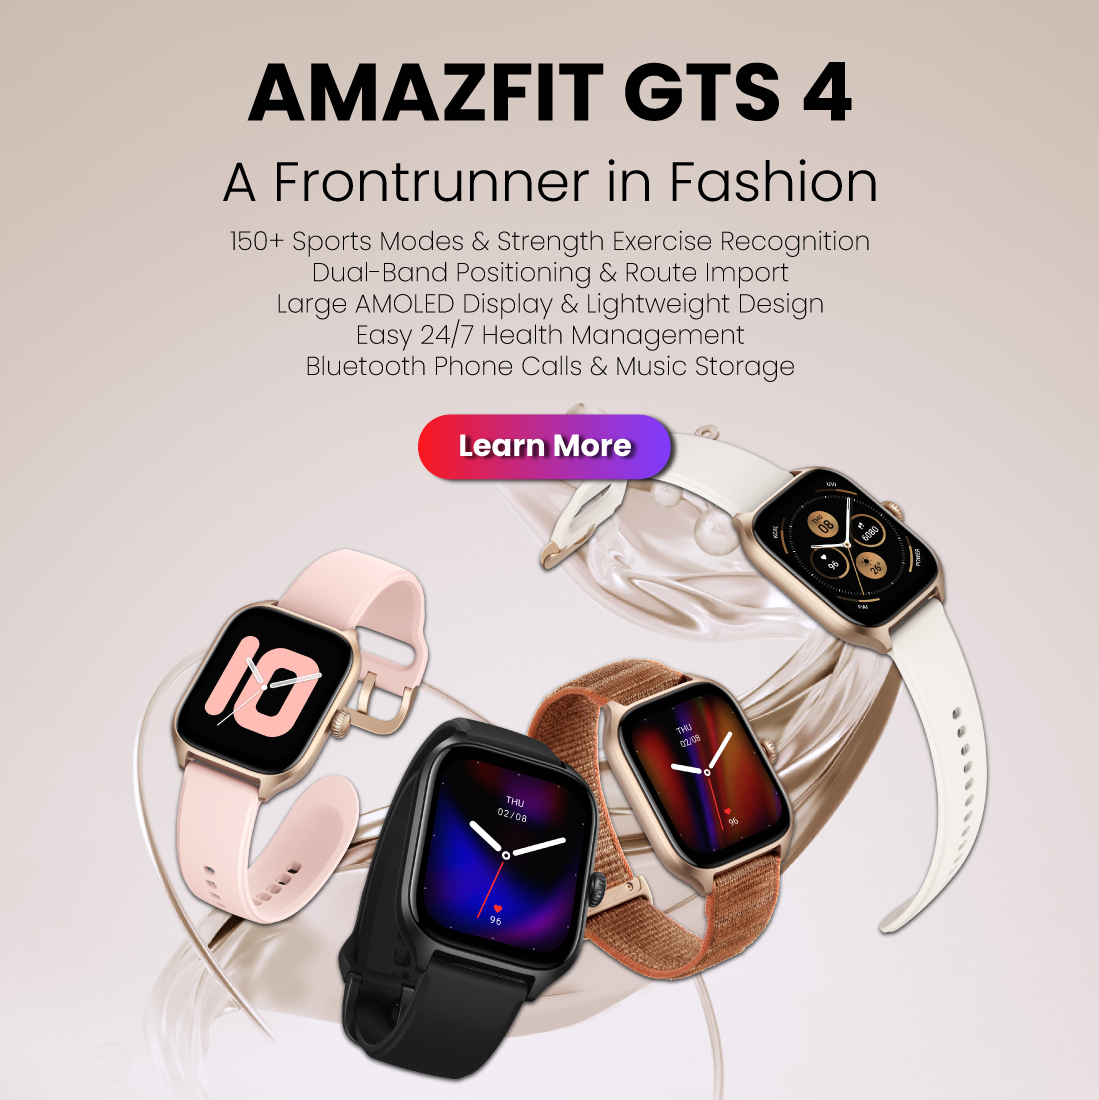 Amazfit GTS 4 Smart Watch with 1.75” AMOLED Display, Bluetooth Calling,  Alexa Built-in, SpO2, Accurate GPS Tracking Fitness Sports Watch with 150